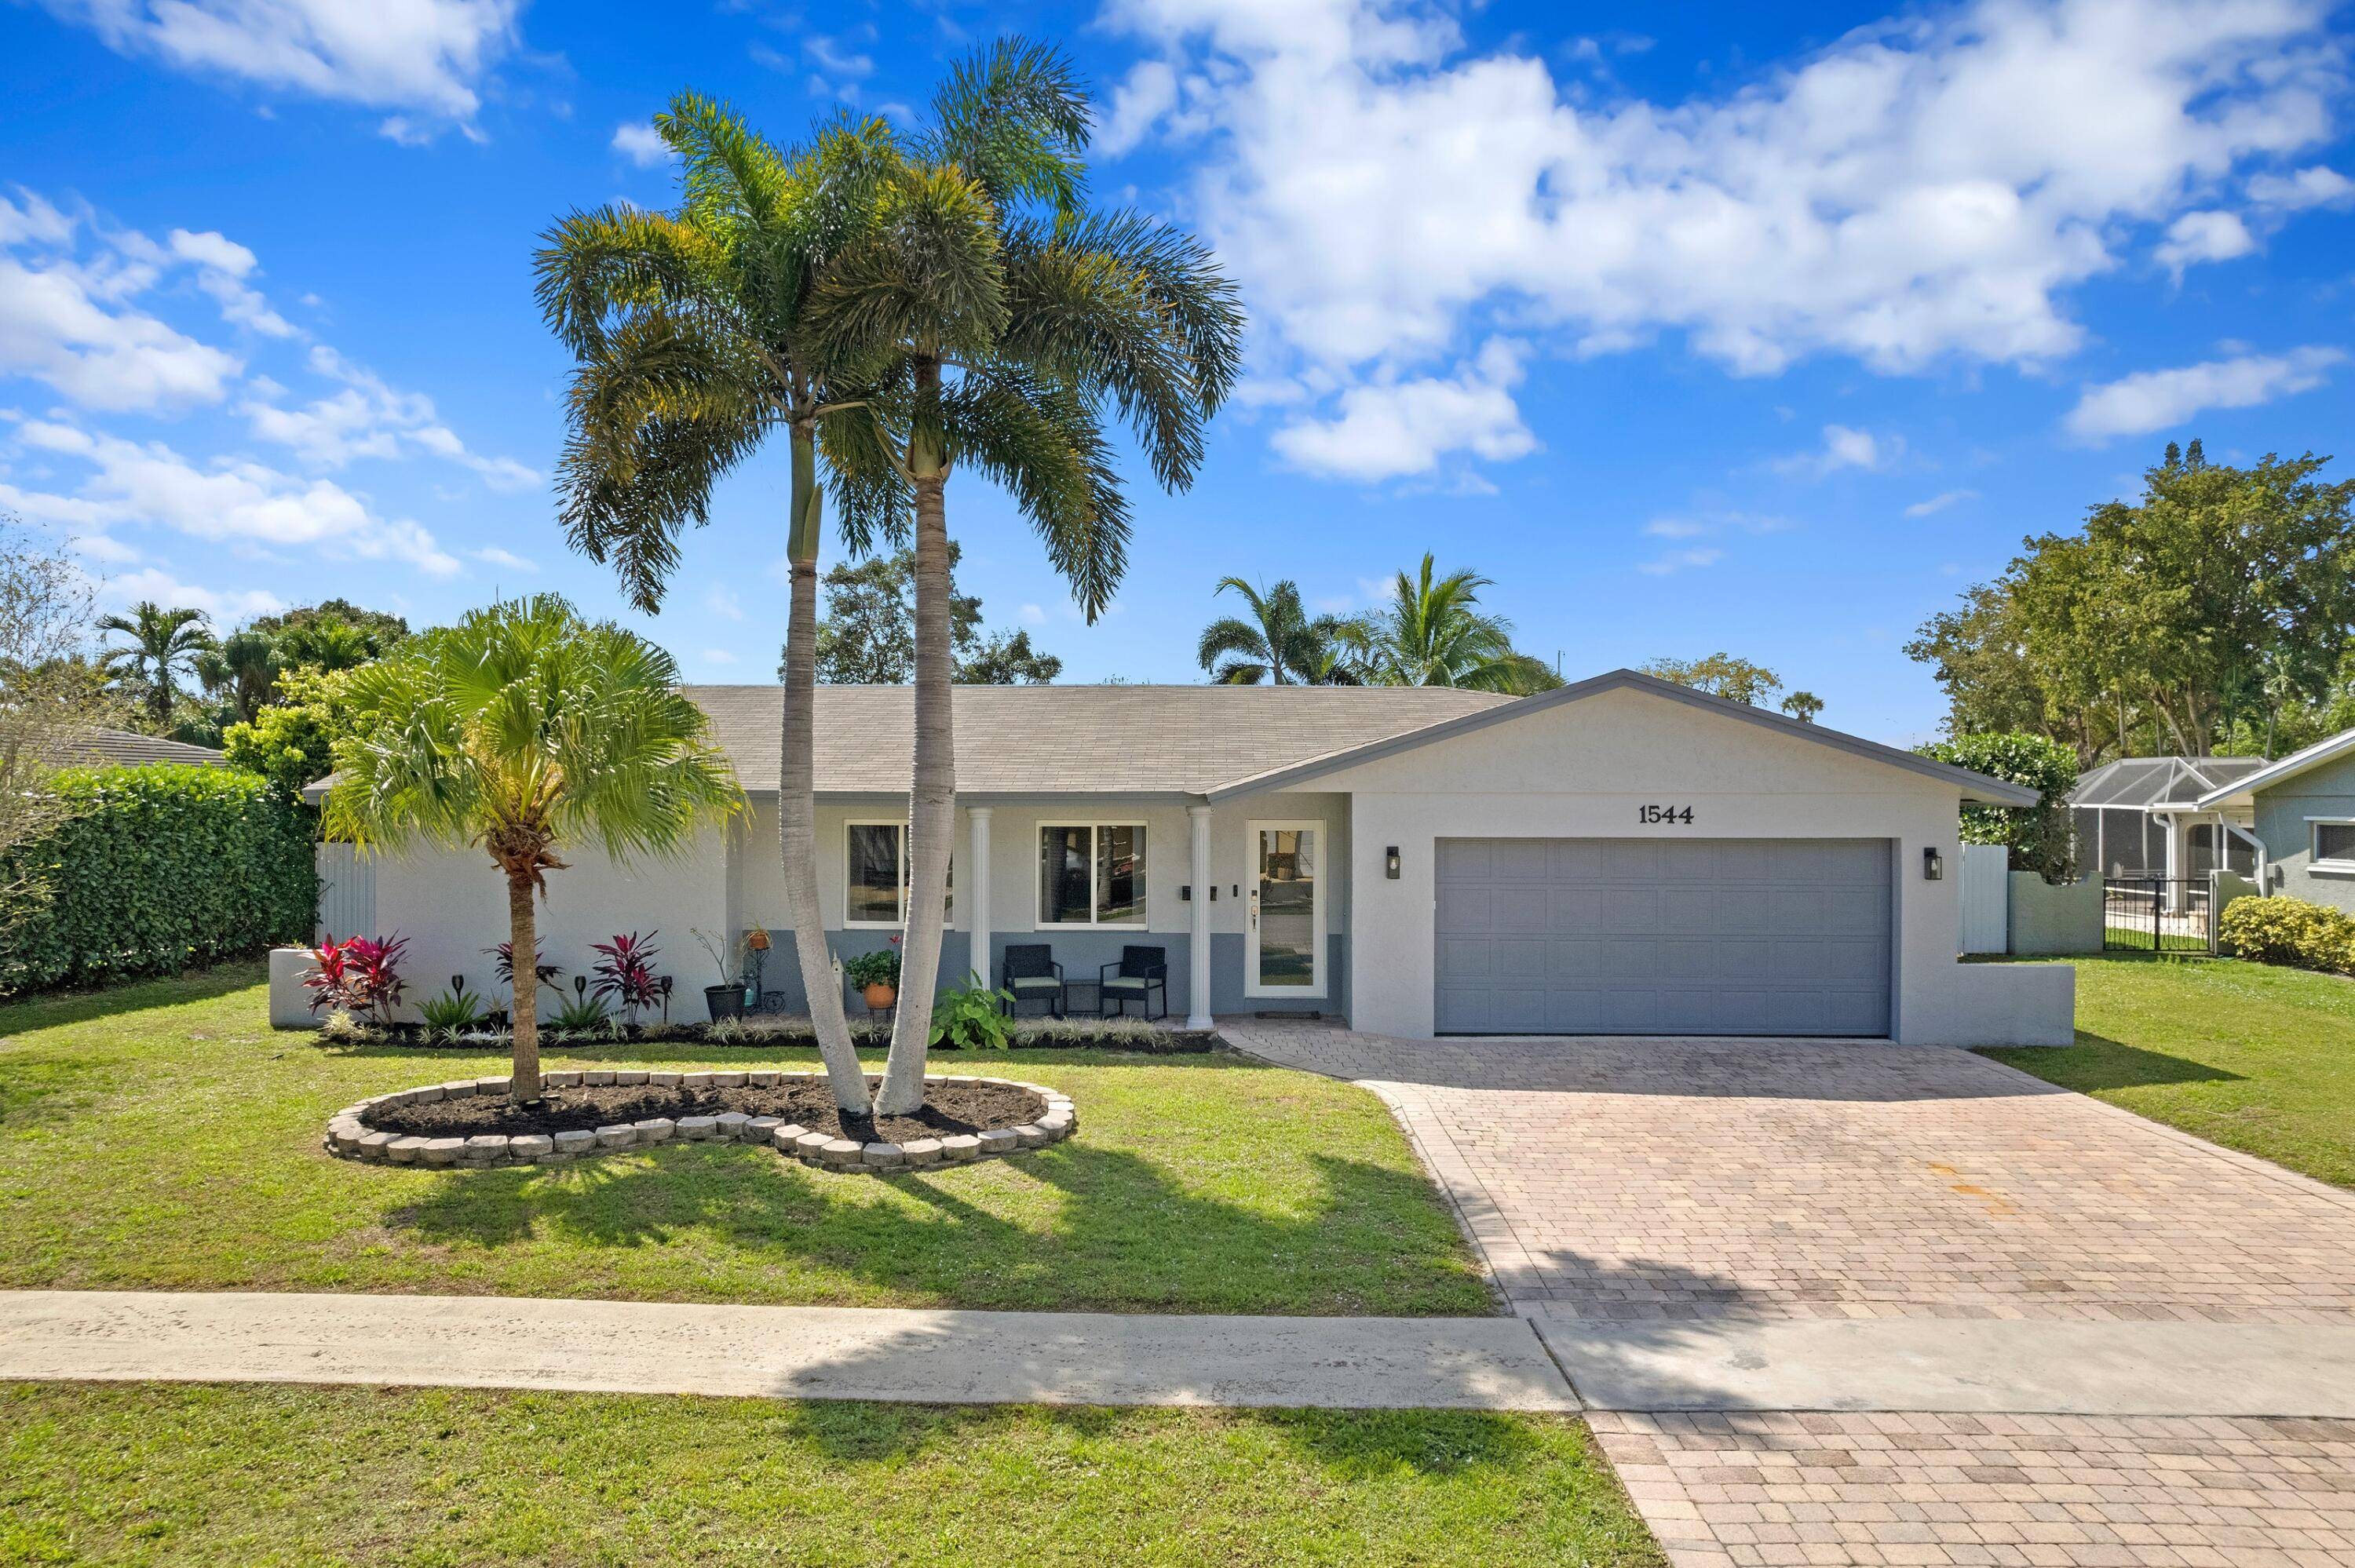 WOW ! ABSOLUTELY STUNNING PRISTINE SINGLE HOME IN SOUGHT AFTER BOCA RATON SQUARE Top Rated Addison Mizner School Bright Open Split Floor Plan All New Hurricane Impact Windows Doors LED ...